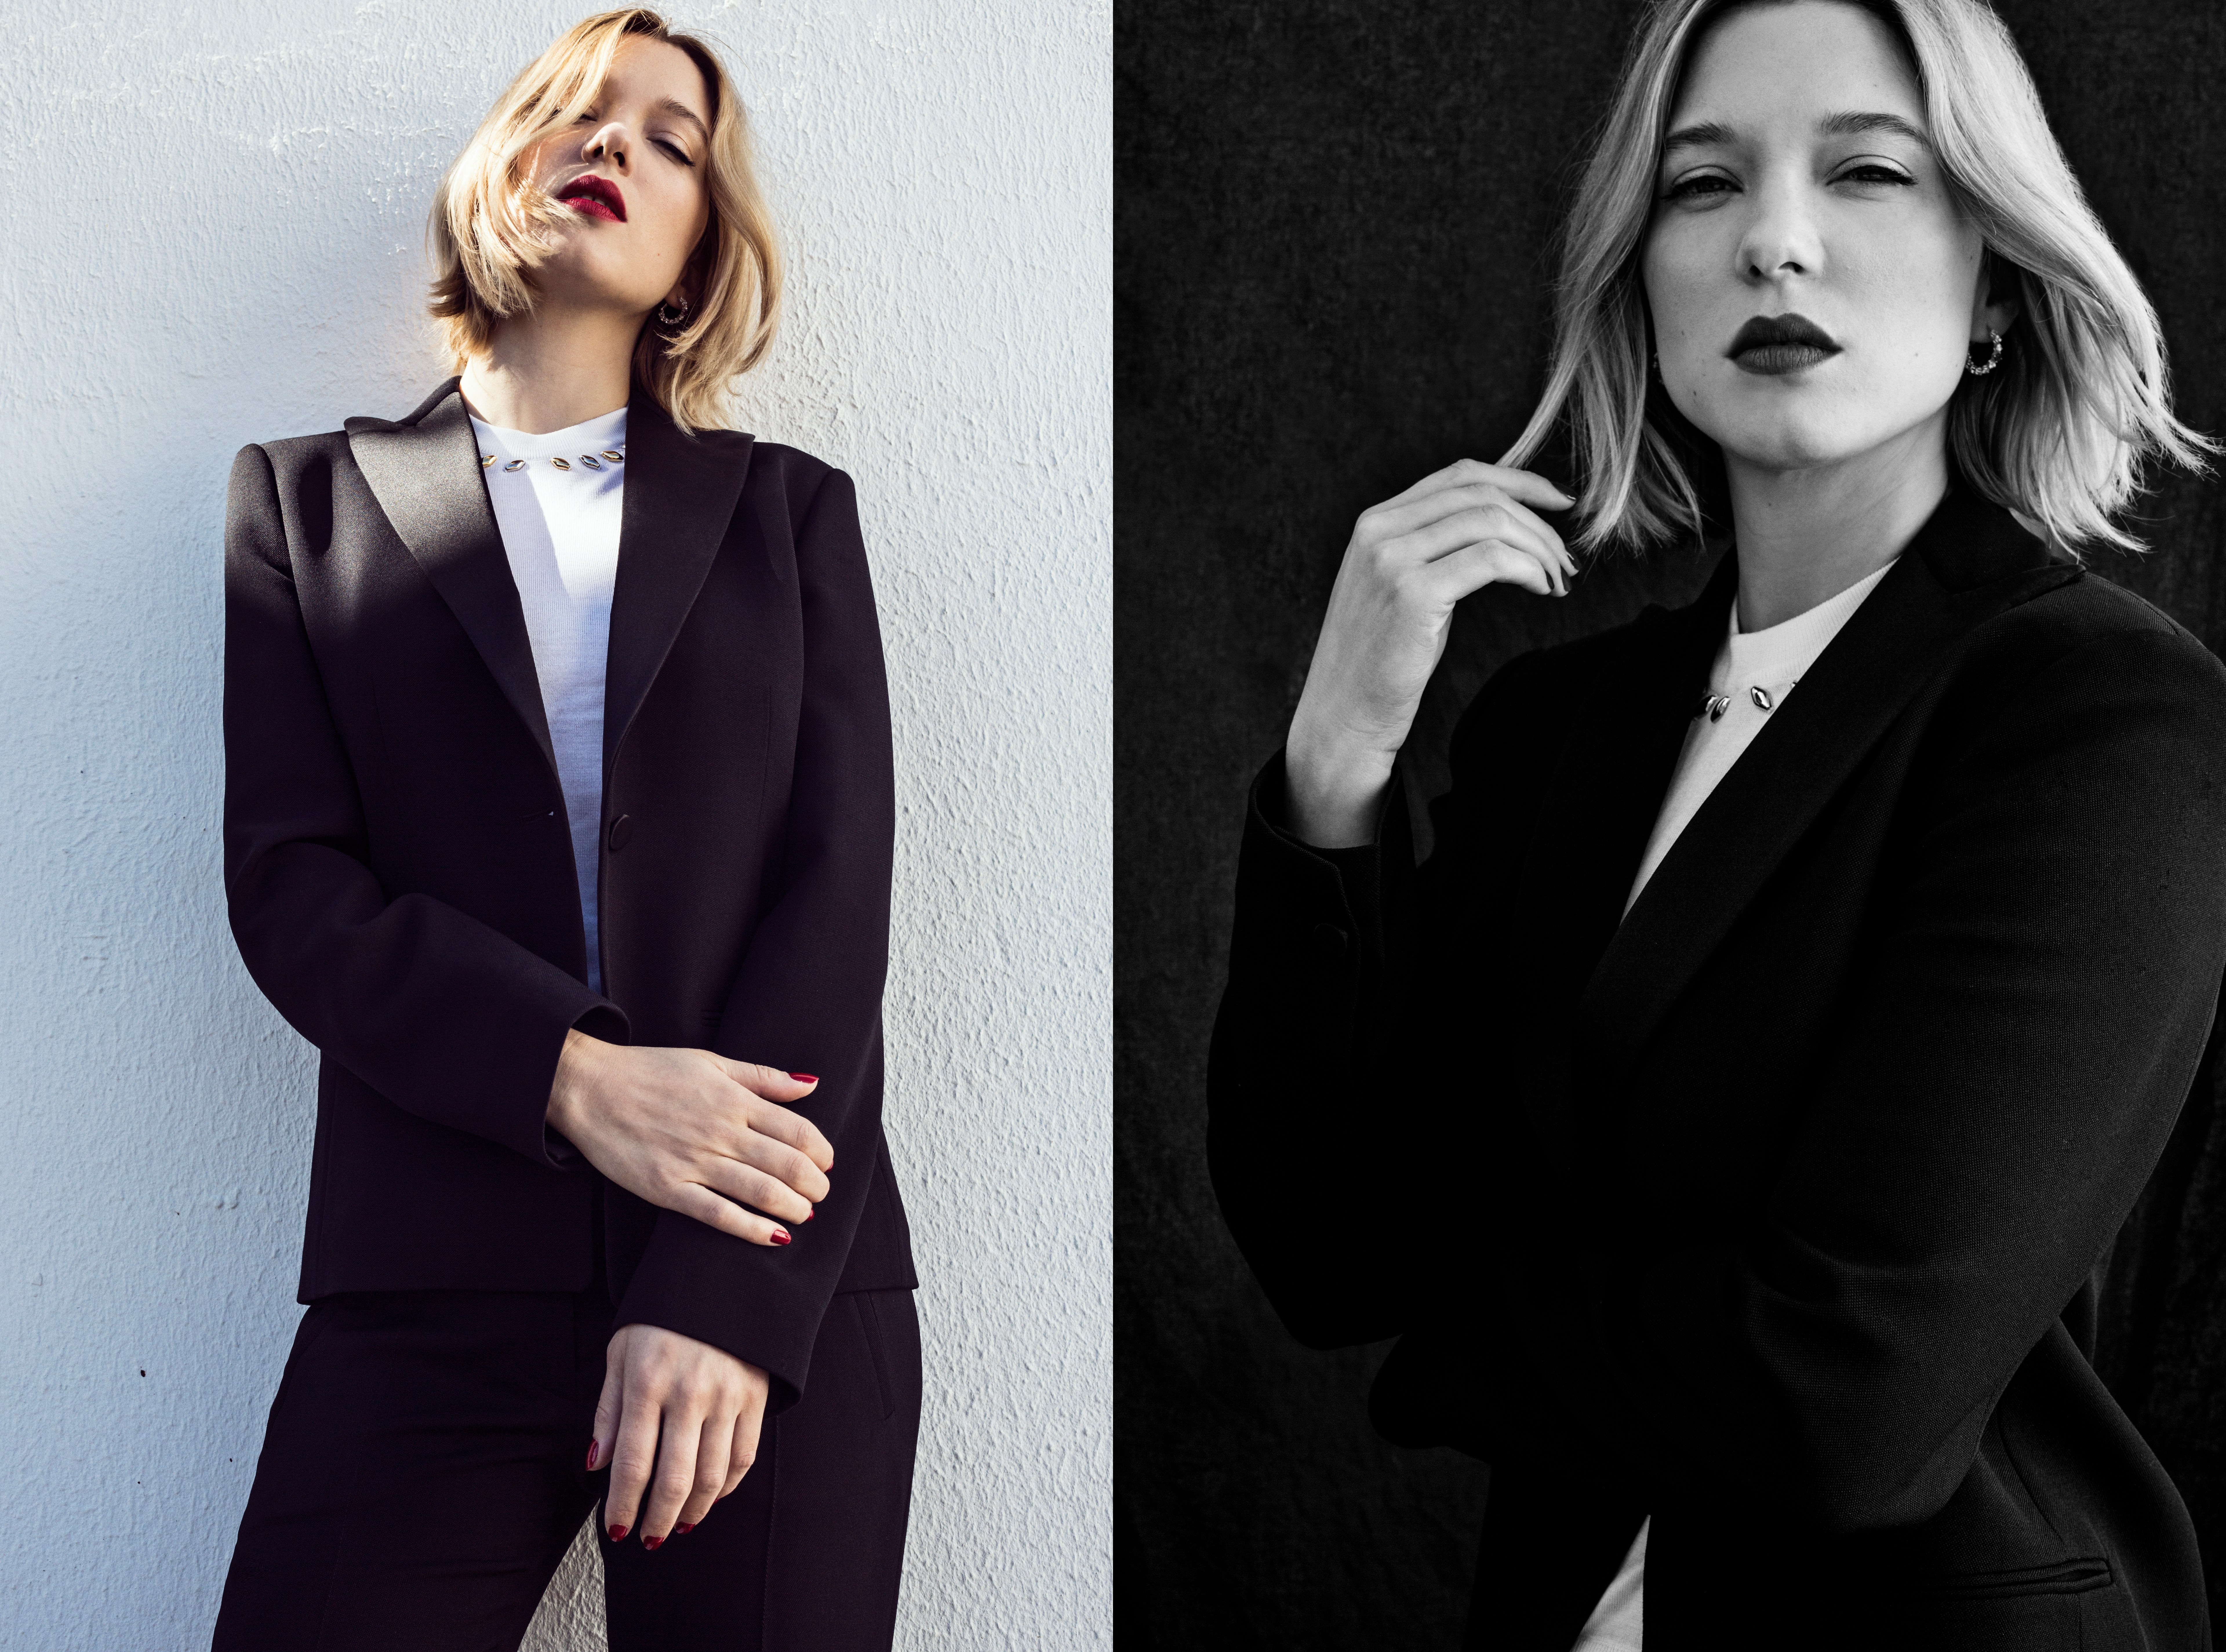 Lea Seydoux Actress Blonde Blue Eyes Red Lipstick White Shirt Black Suit Red Nails 7680x5700